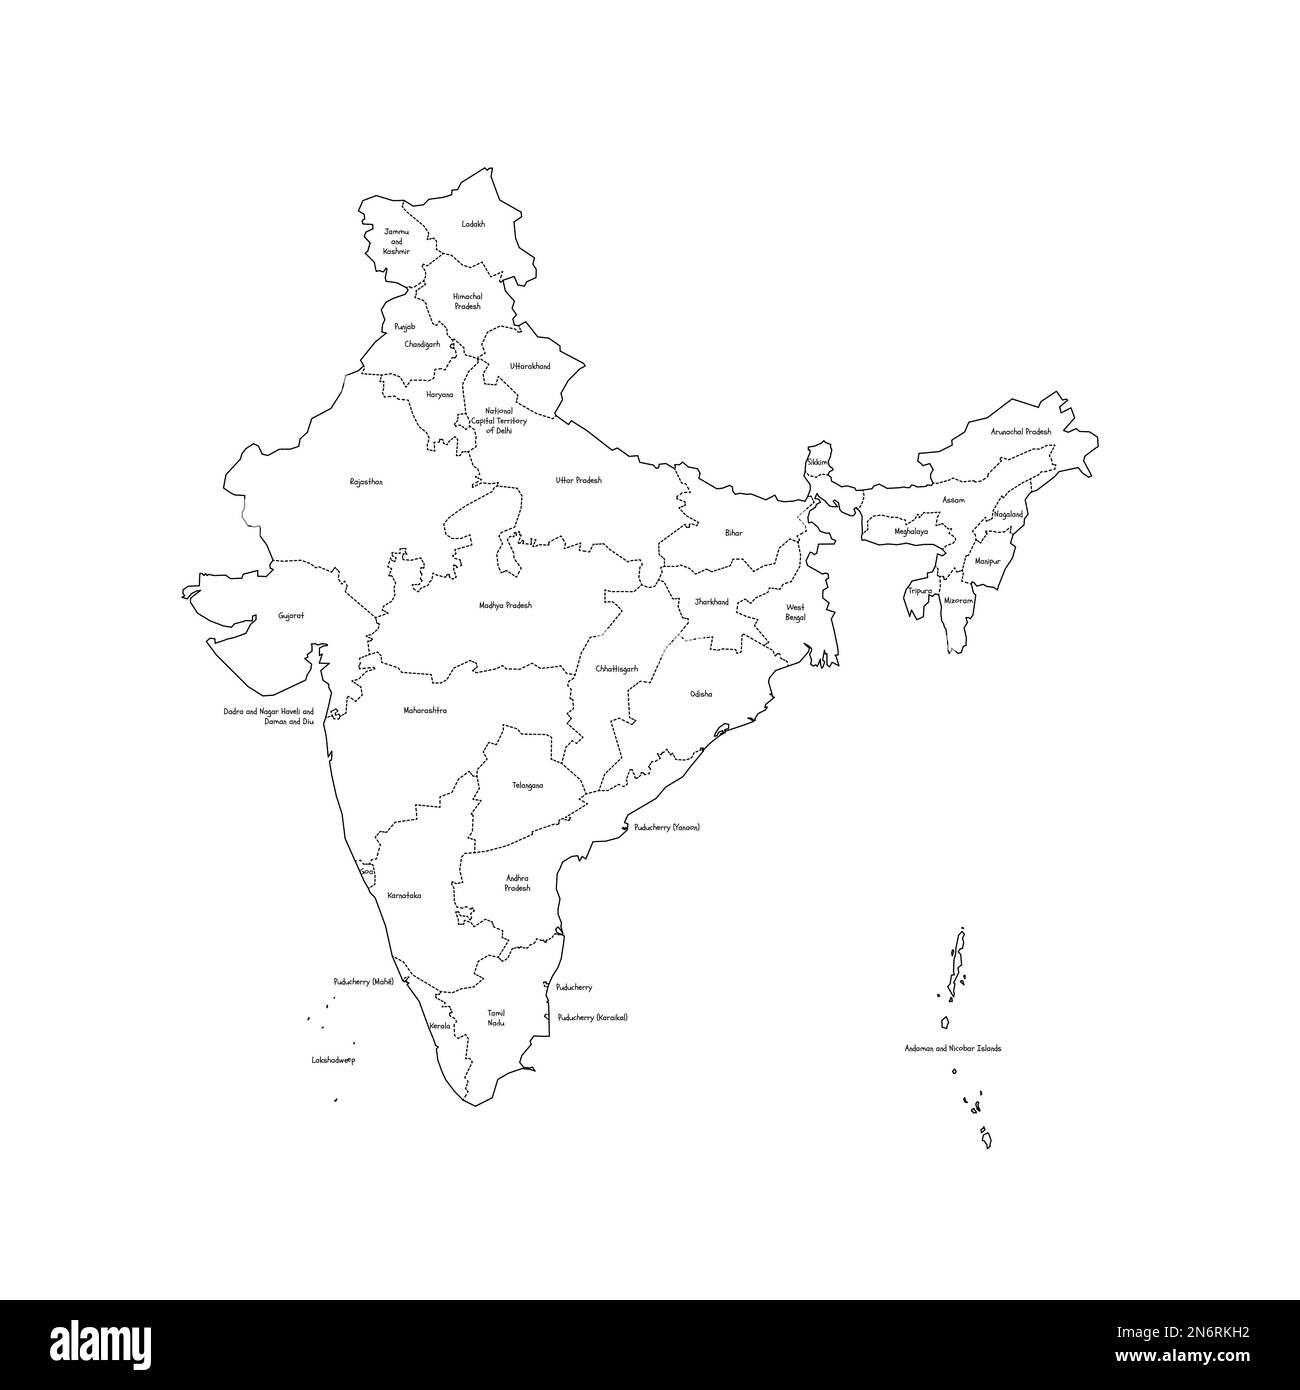 India political map of administrative divisions - states and union teritorries. Handdrawn doodle style map with black outline borders and name labels. Stock Vector